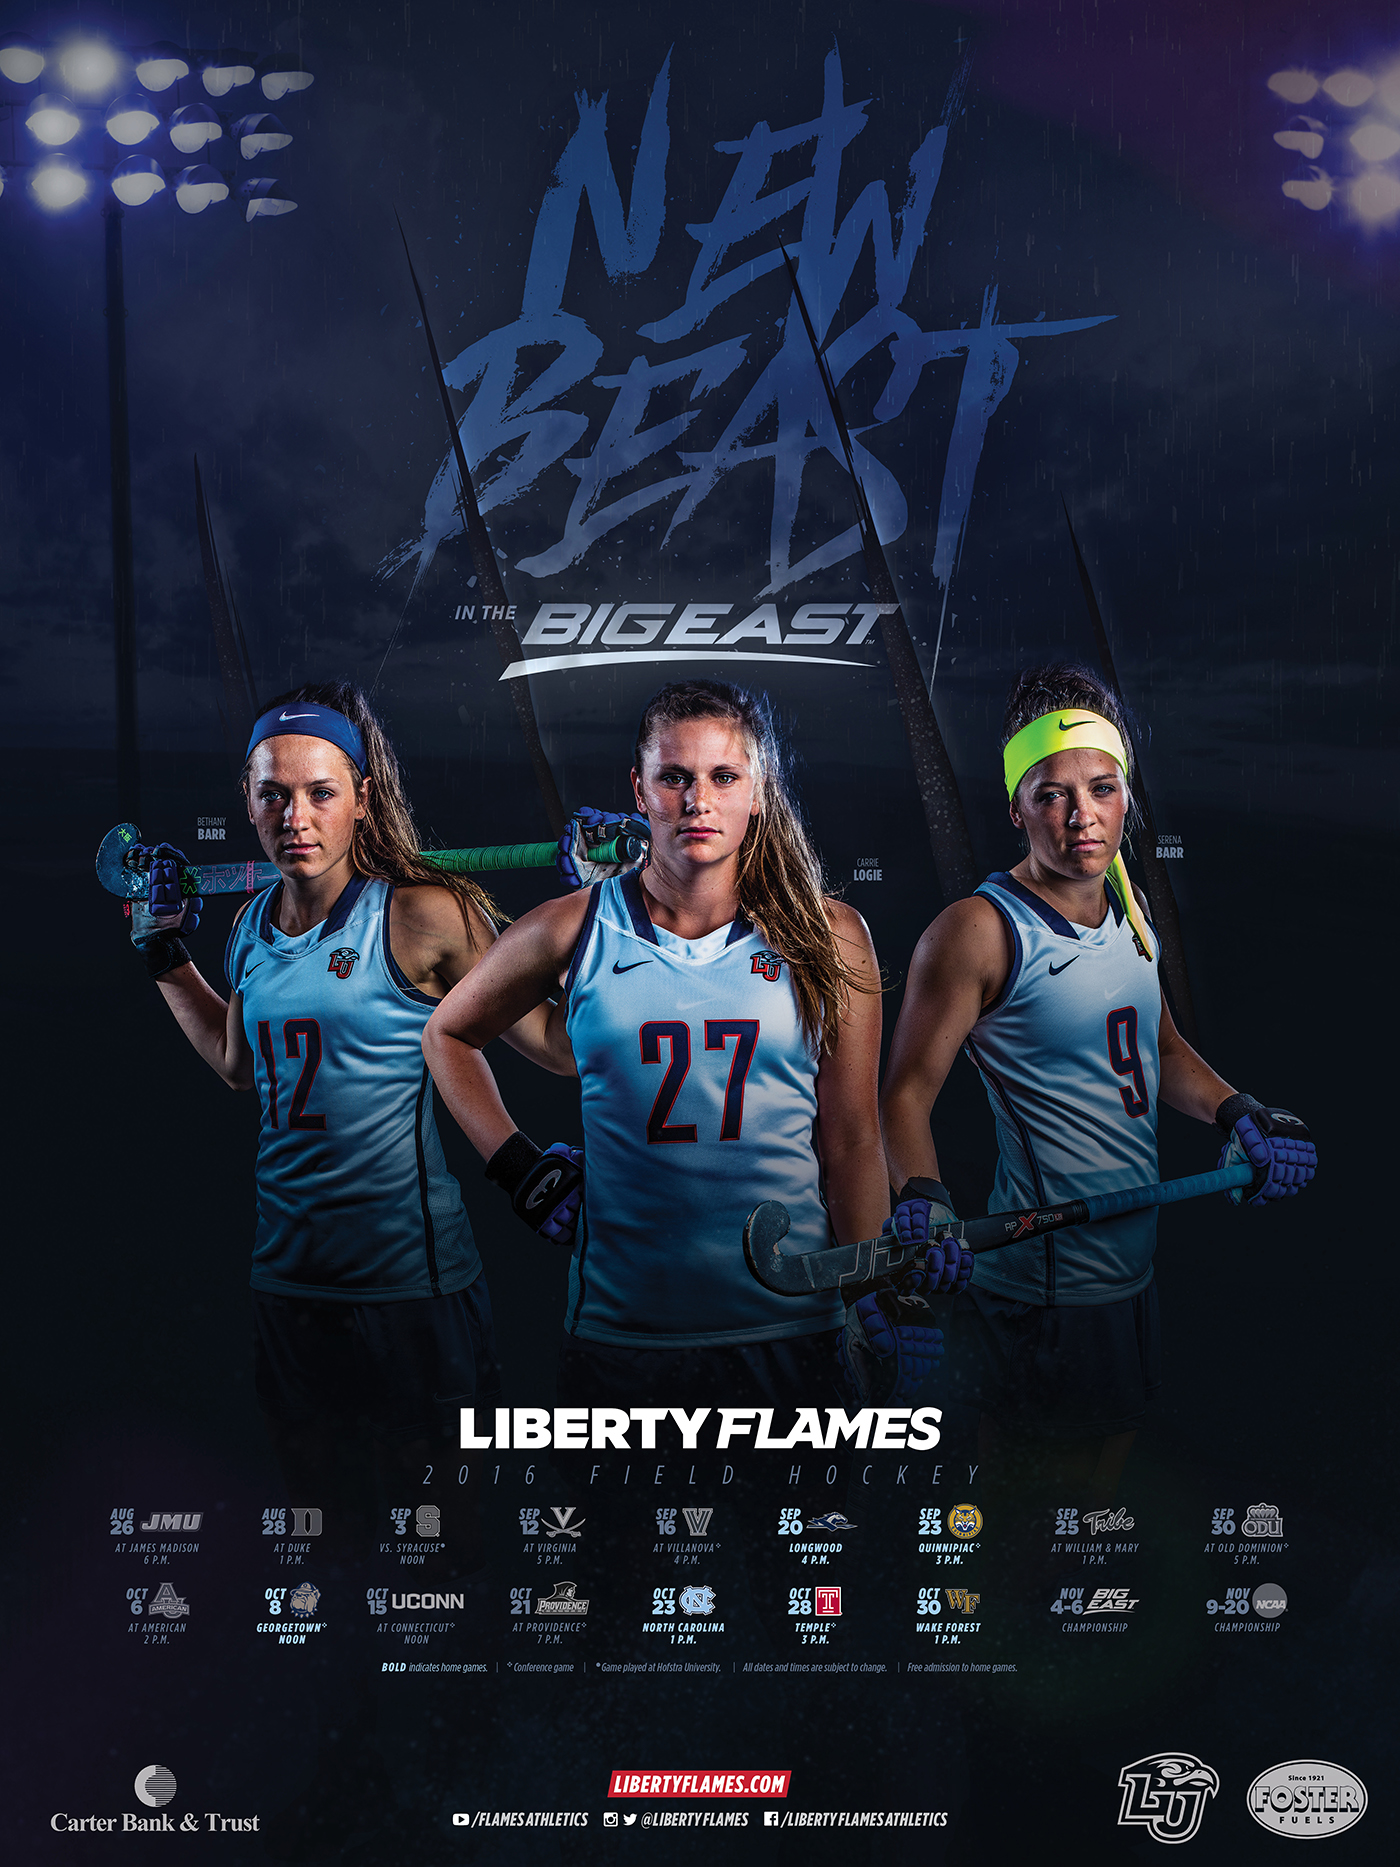 hockey field hockey Big East conference poster Billboards beast claws sport athletics retouch Liberty NCAA college University